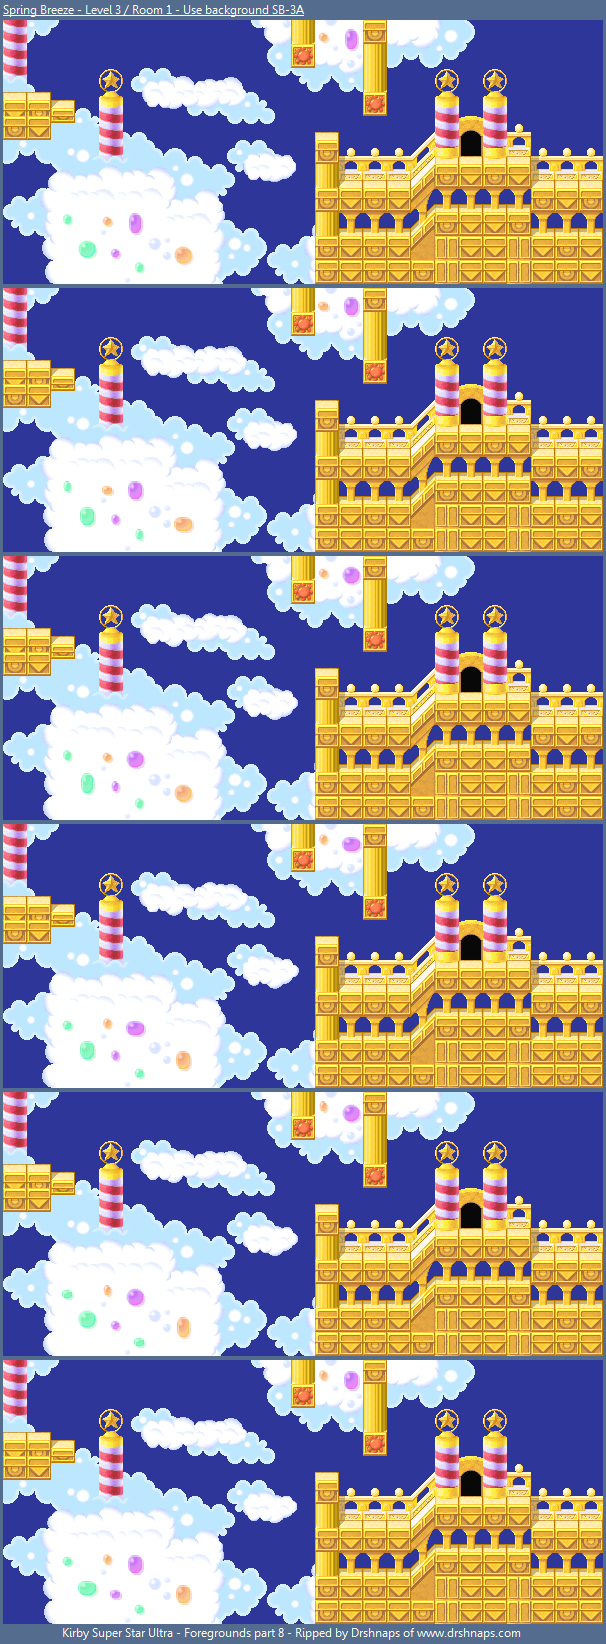 Kirby Super Star Ultra - Stage 3: Bubbly Clouds 1